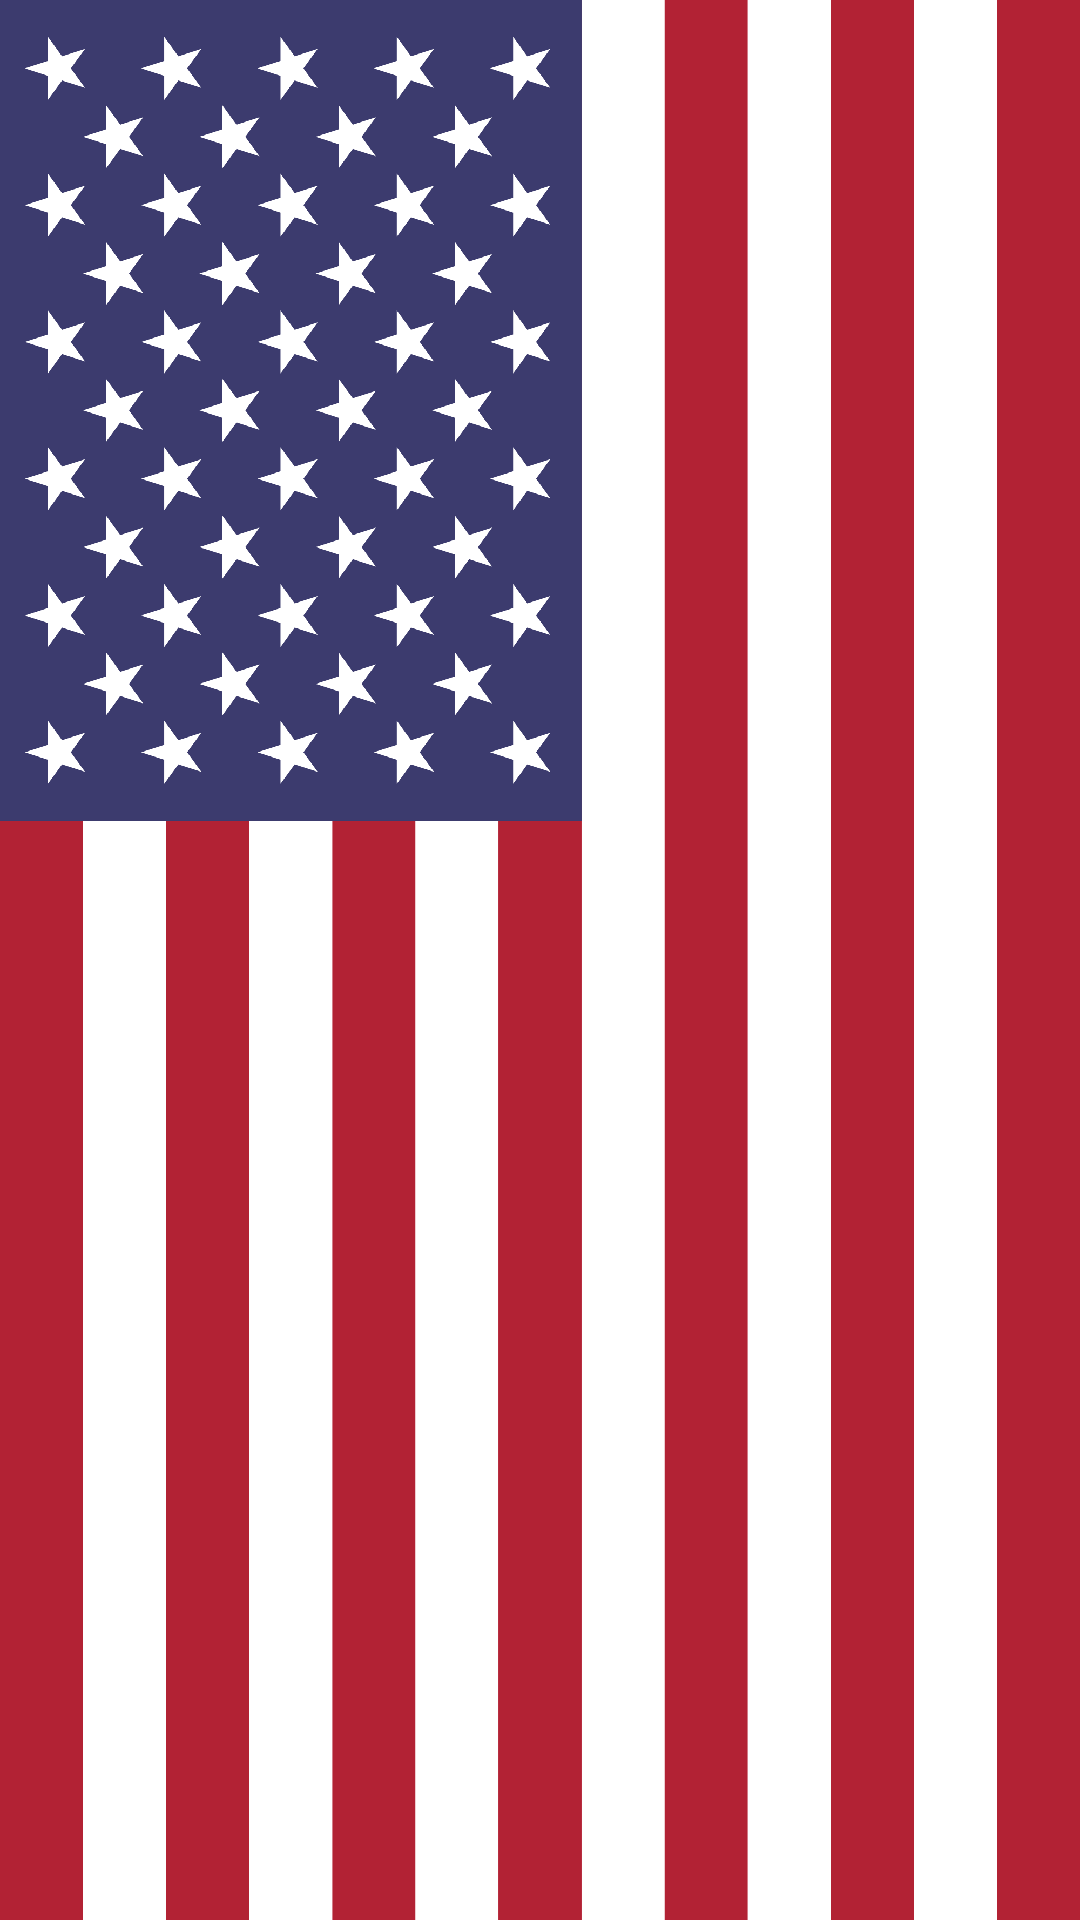 USA flag htc one wallpaper htc one wallpaper. HTC One